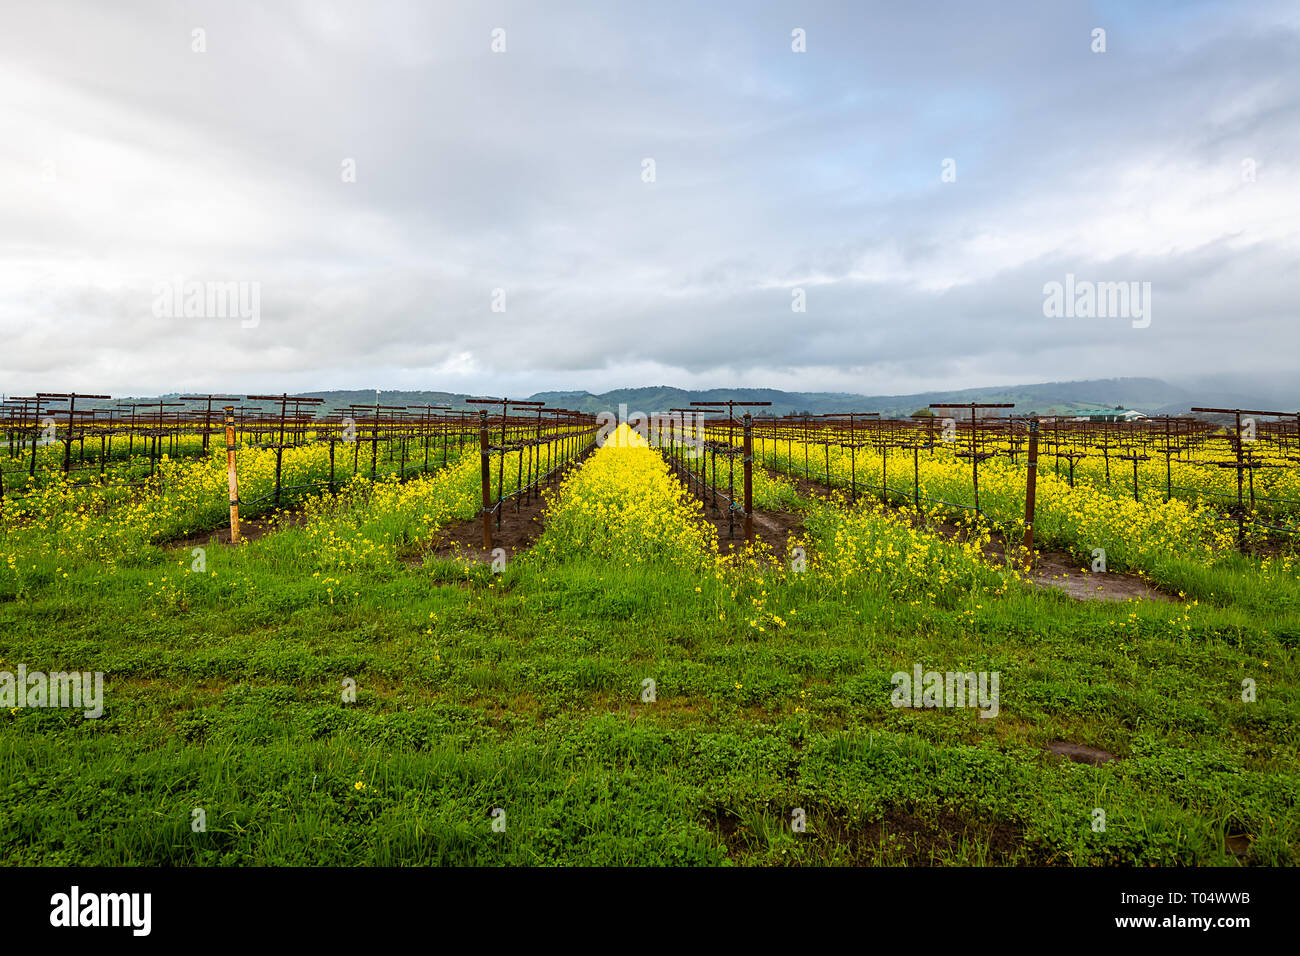 Storm clouds over the vineyards and mustard flowers Stock Photo